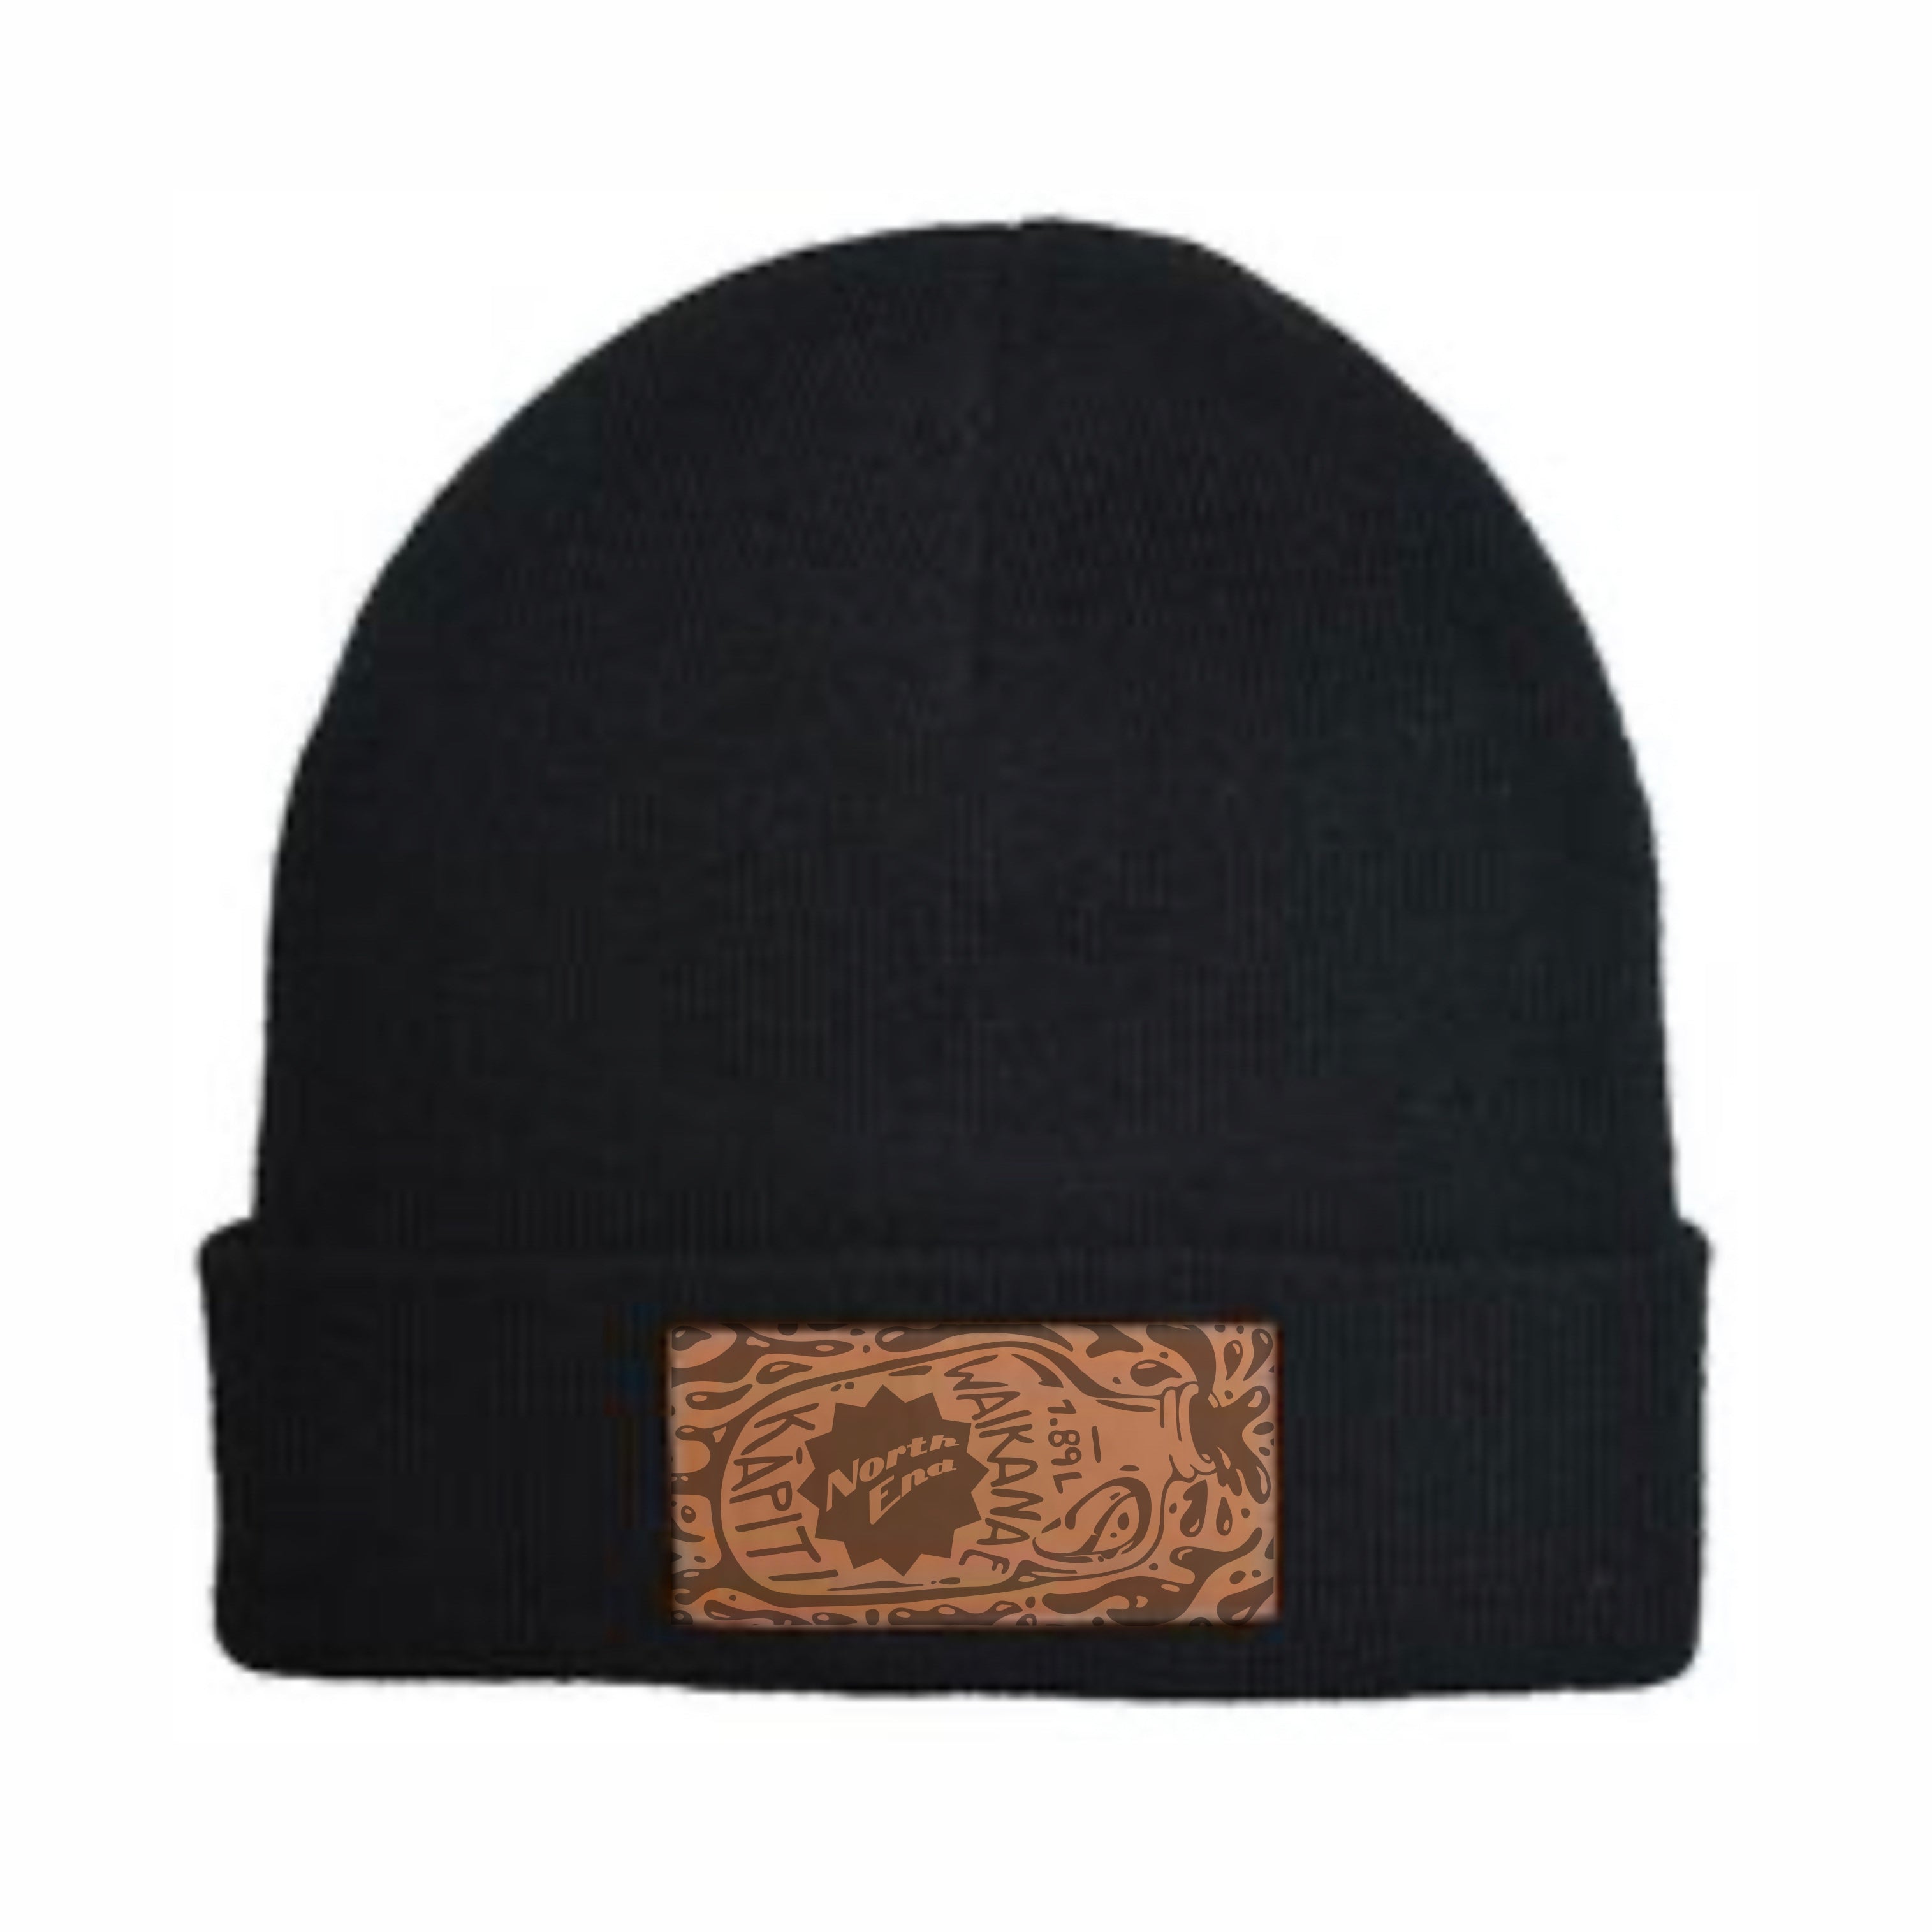 NORTH END LASER ETCHED BEANIE